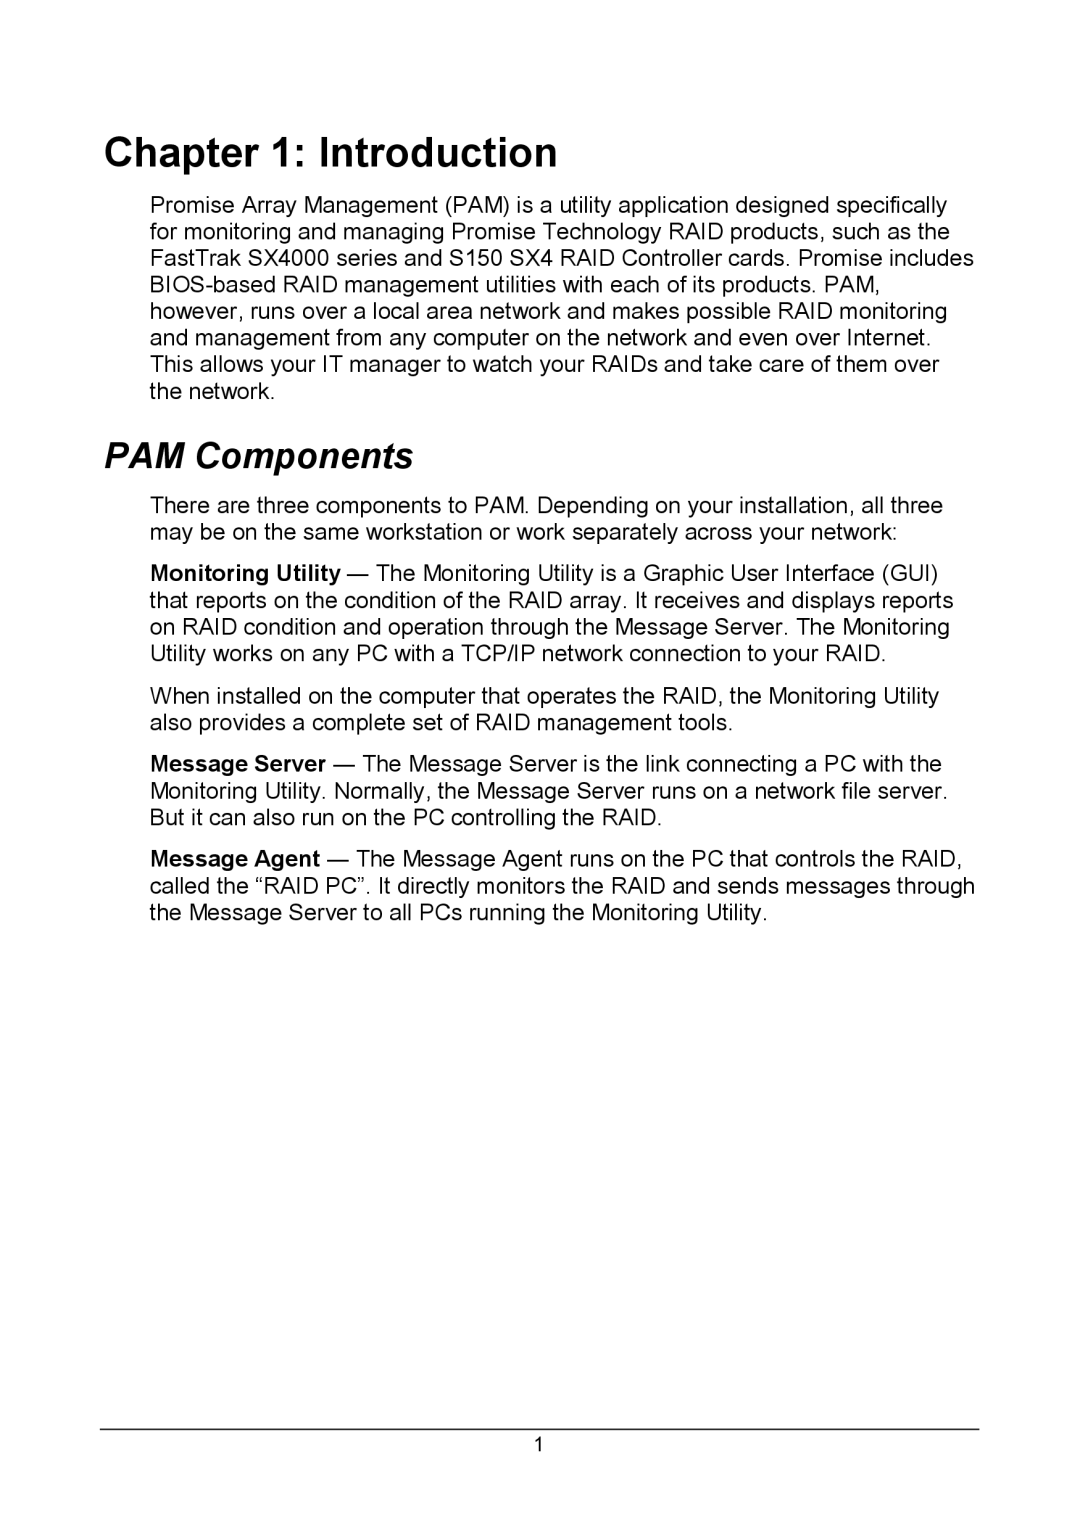 Promise Technology Version 4.4 user manual Introduction, PAM Components 